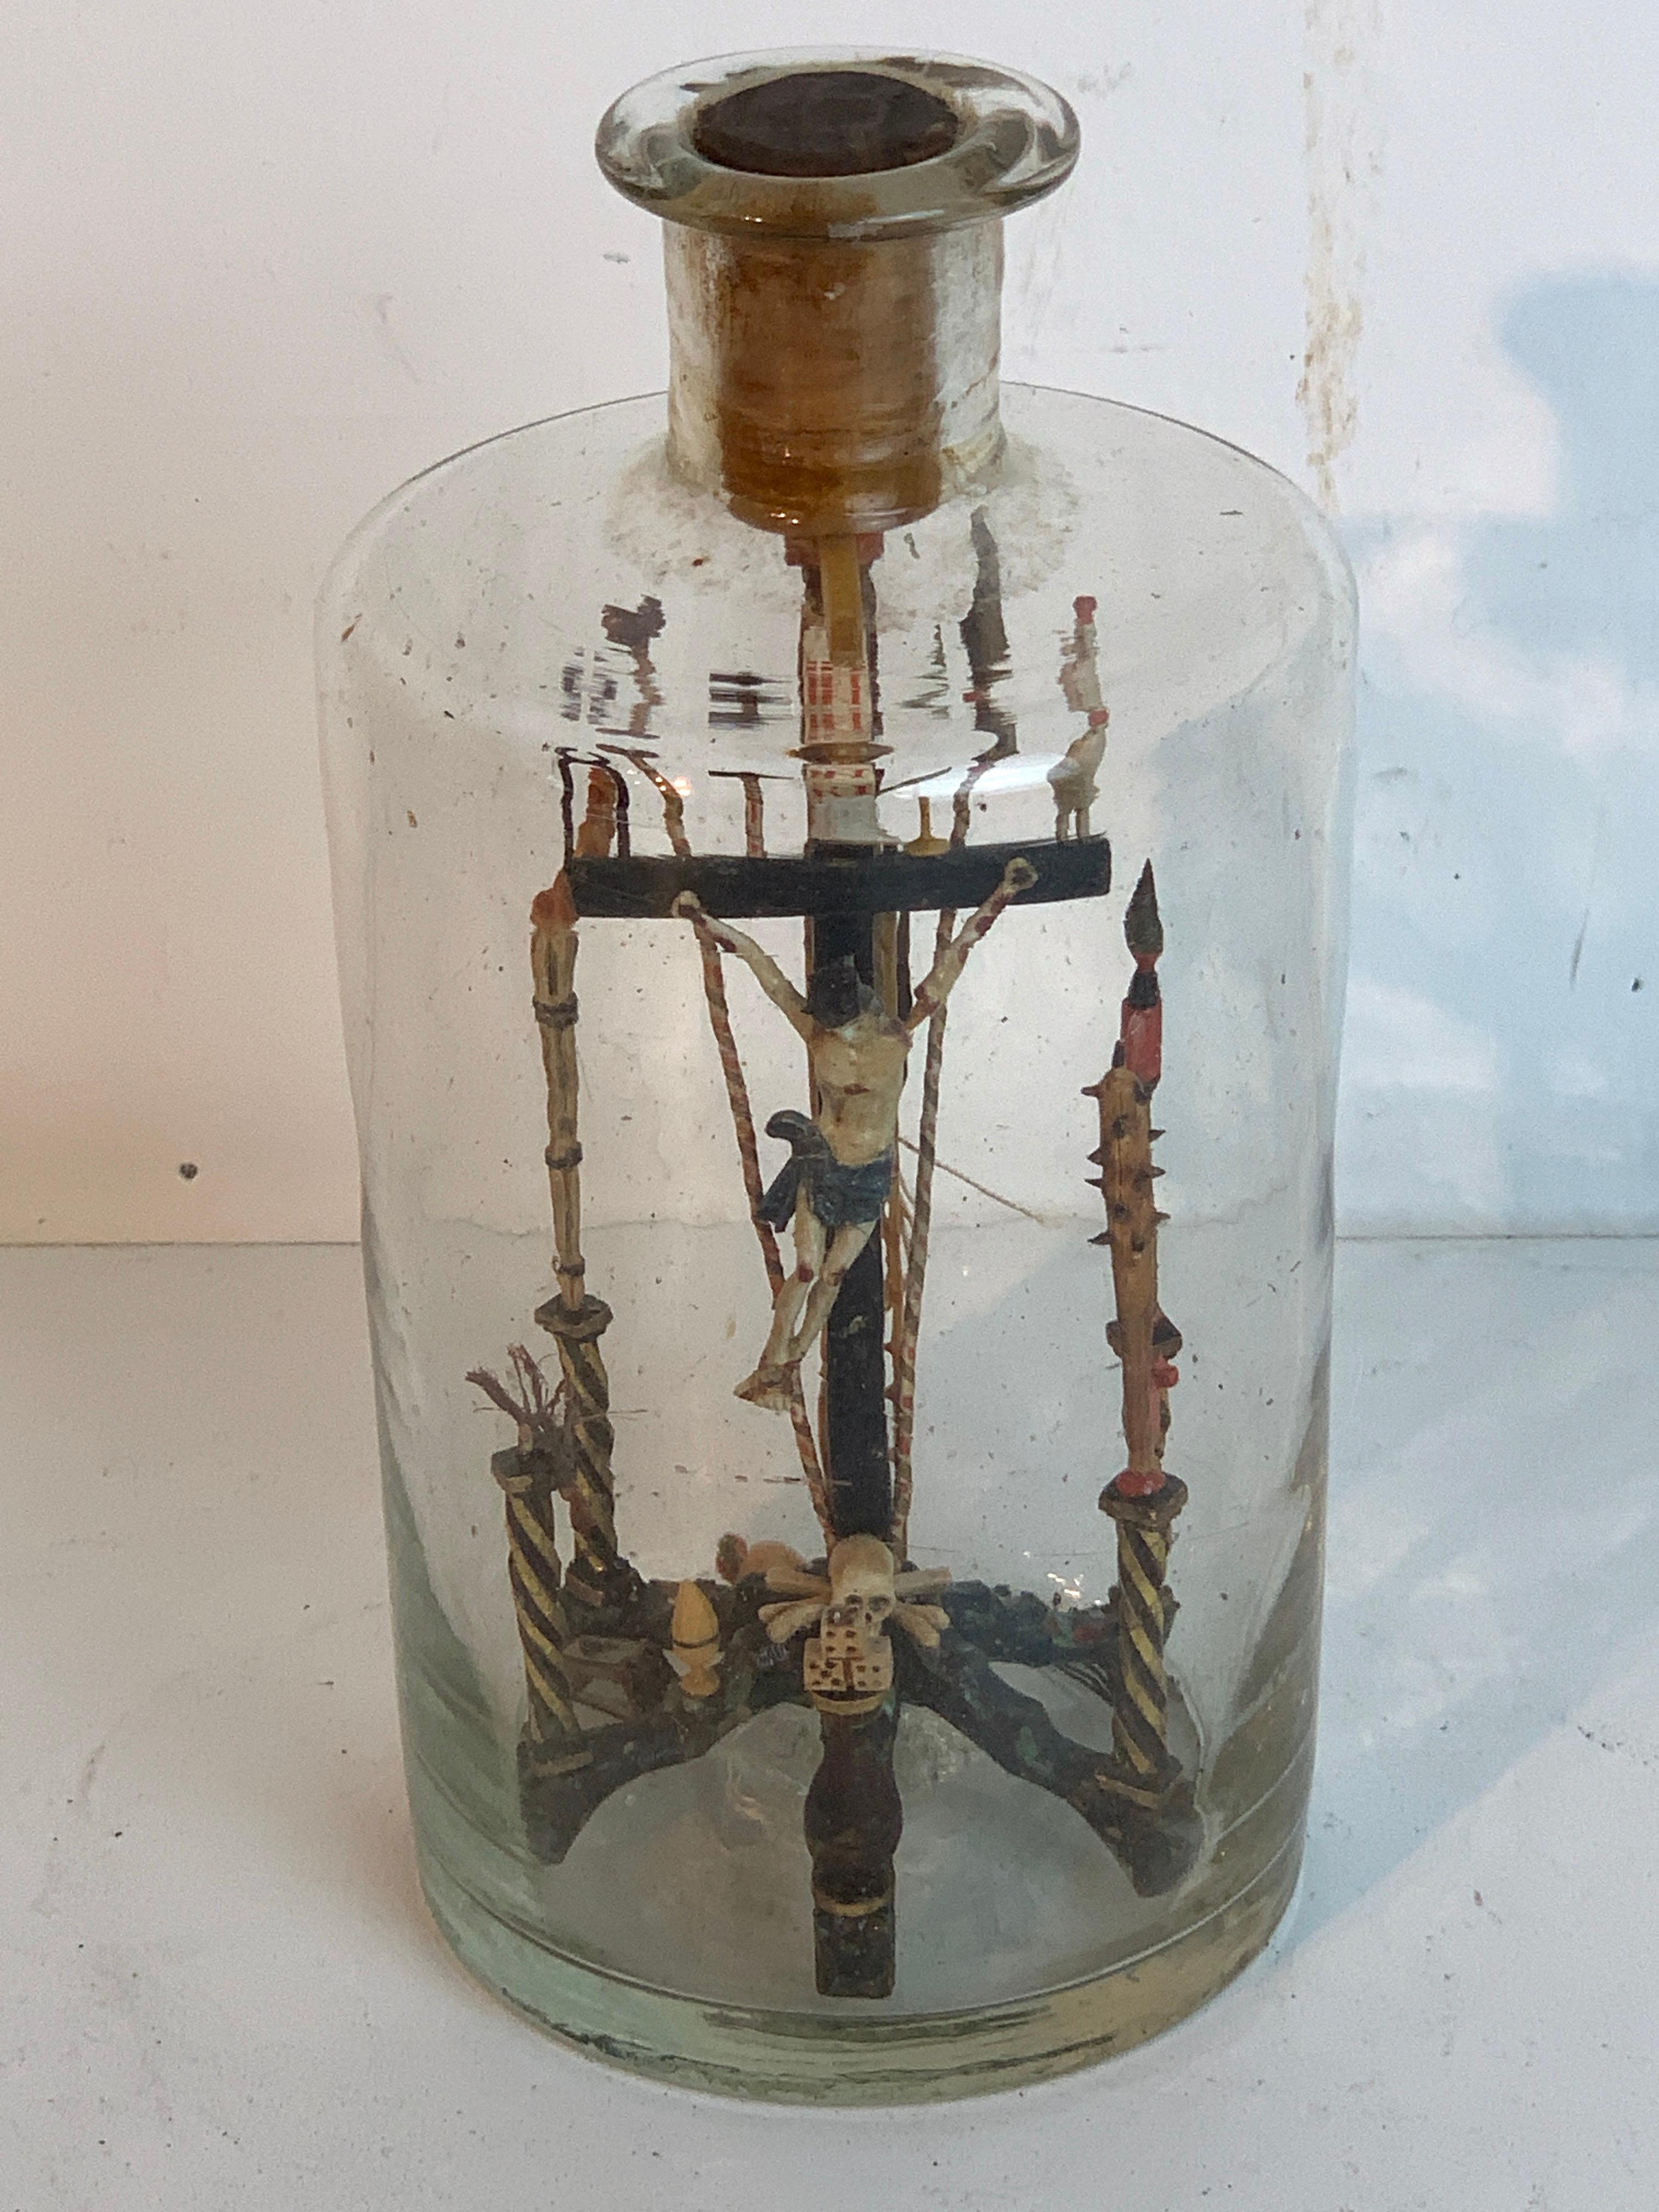 Folk Art Crucifixion scene in a bottle, intricately detailed carved and polychromed wood crucifixion with numerous elements of the passion of Christ.